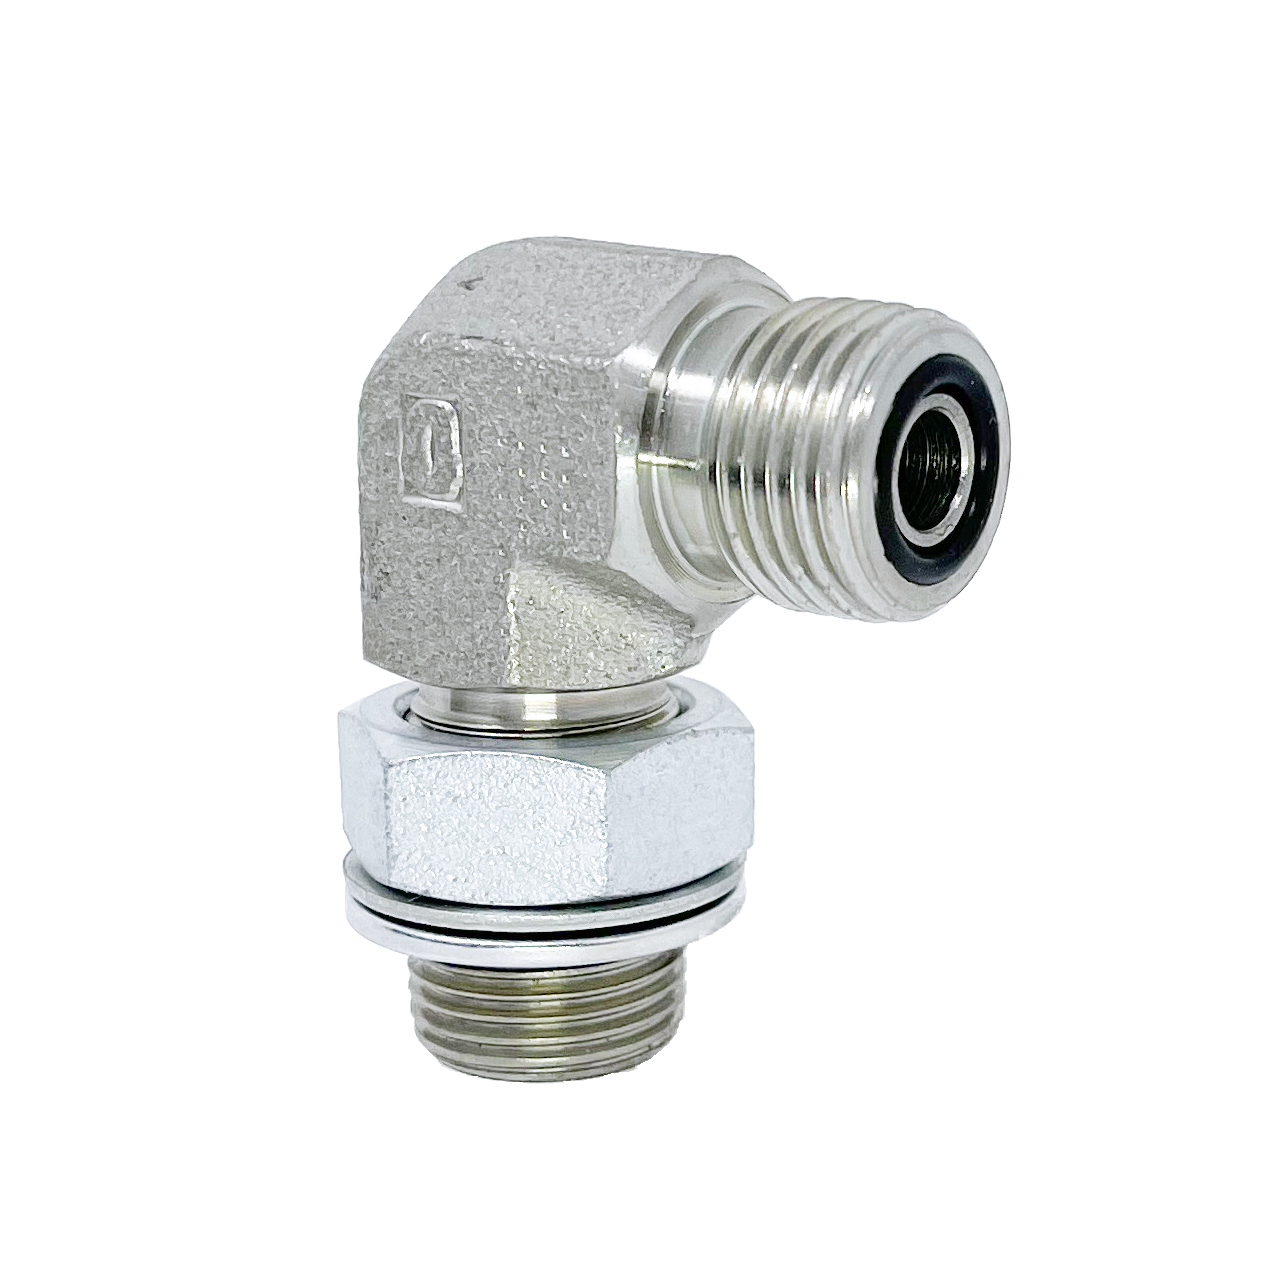 6059-06-06 : Adaptall 90-Degree  Adapter, Male 0.375 (3/8") ORFS x Male 0.375 (3/8") BSPP, Carbon Steel